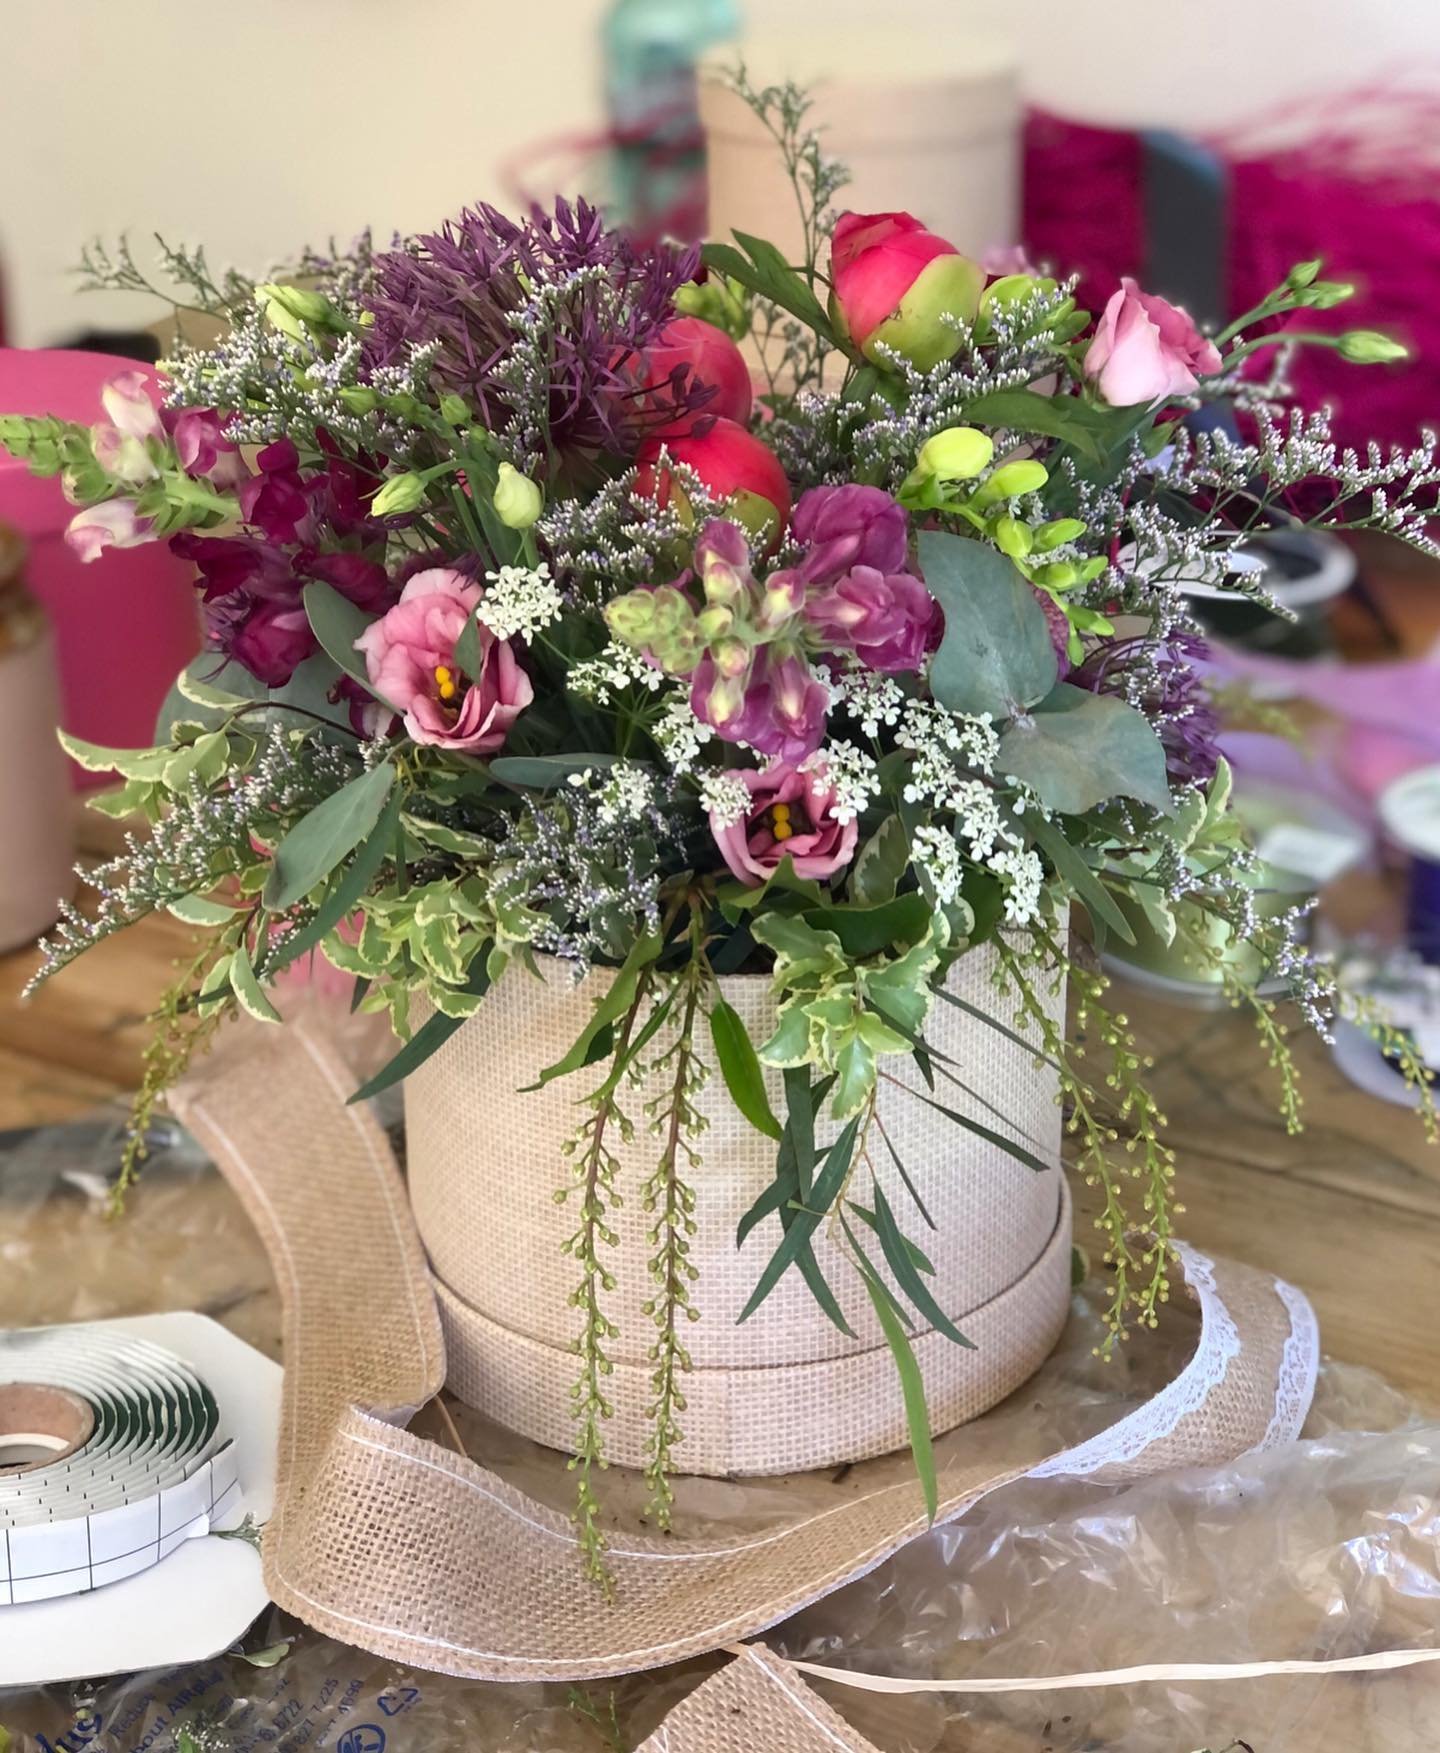 What a lovely morning creating hatbox designs in our workshop .. very thankful that the sun came out! 🌿🌸

More classes can be booked via our website - visit Bio &amp; select Floral Craft Workshops 🌿🌸